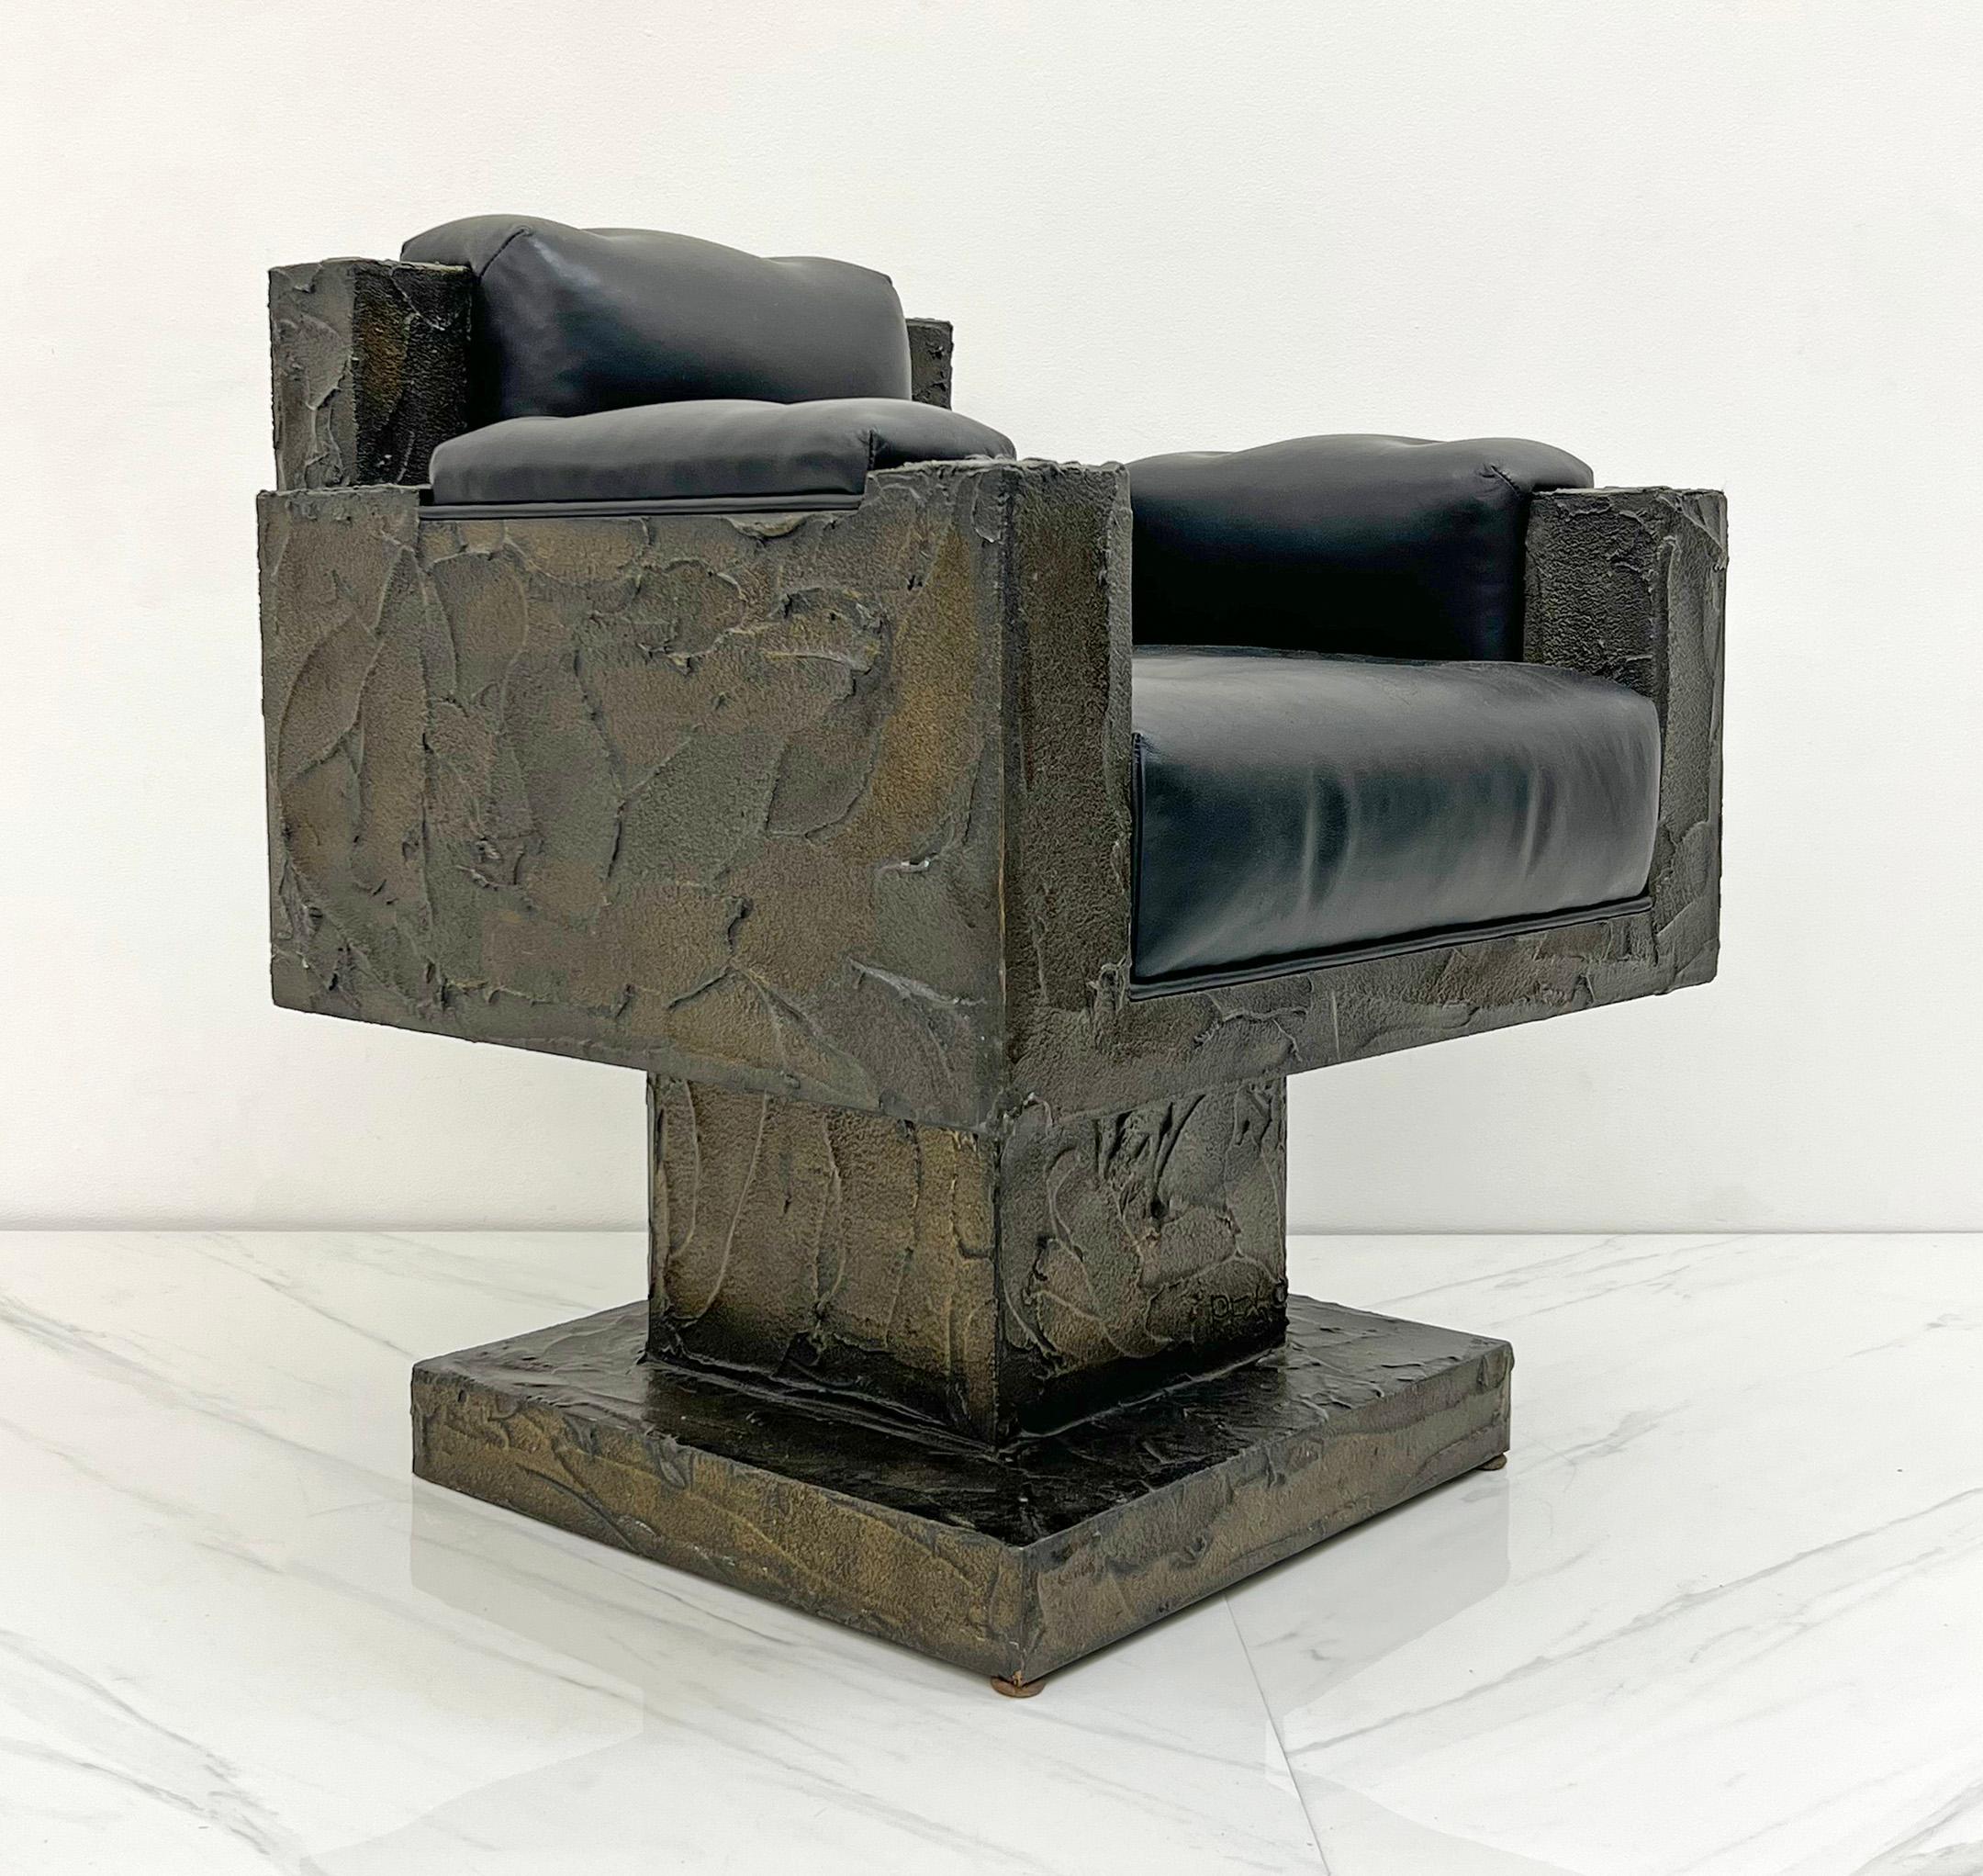 Brutalist Early Paul Evans Sculpted Bronze Throne Chair, Signed and Dated, 1969 For Sale